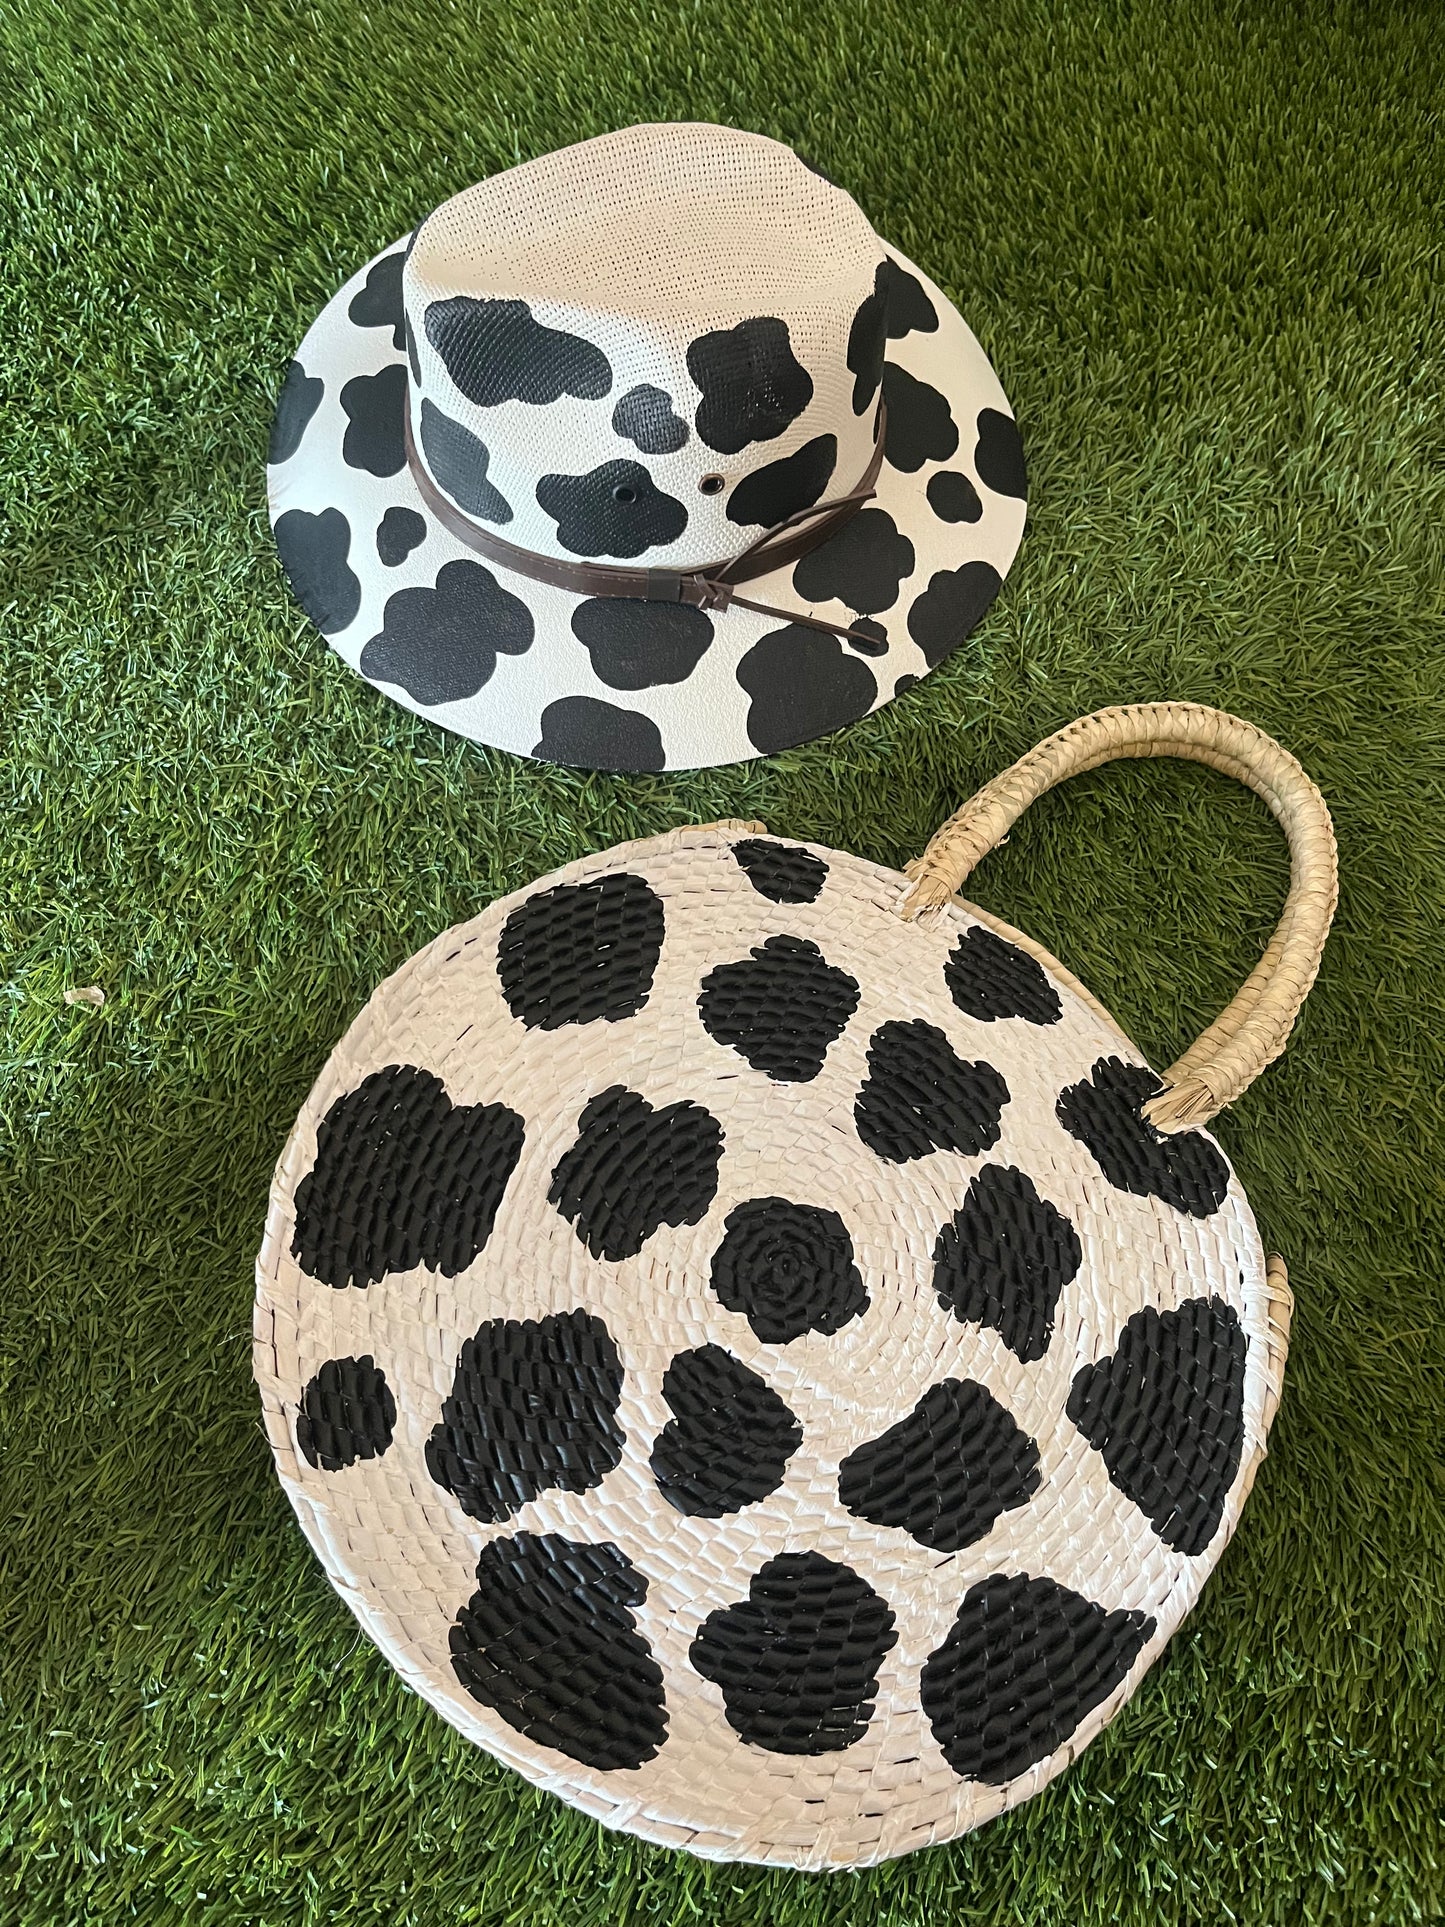 Cow print purses and hat